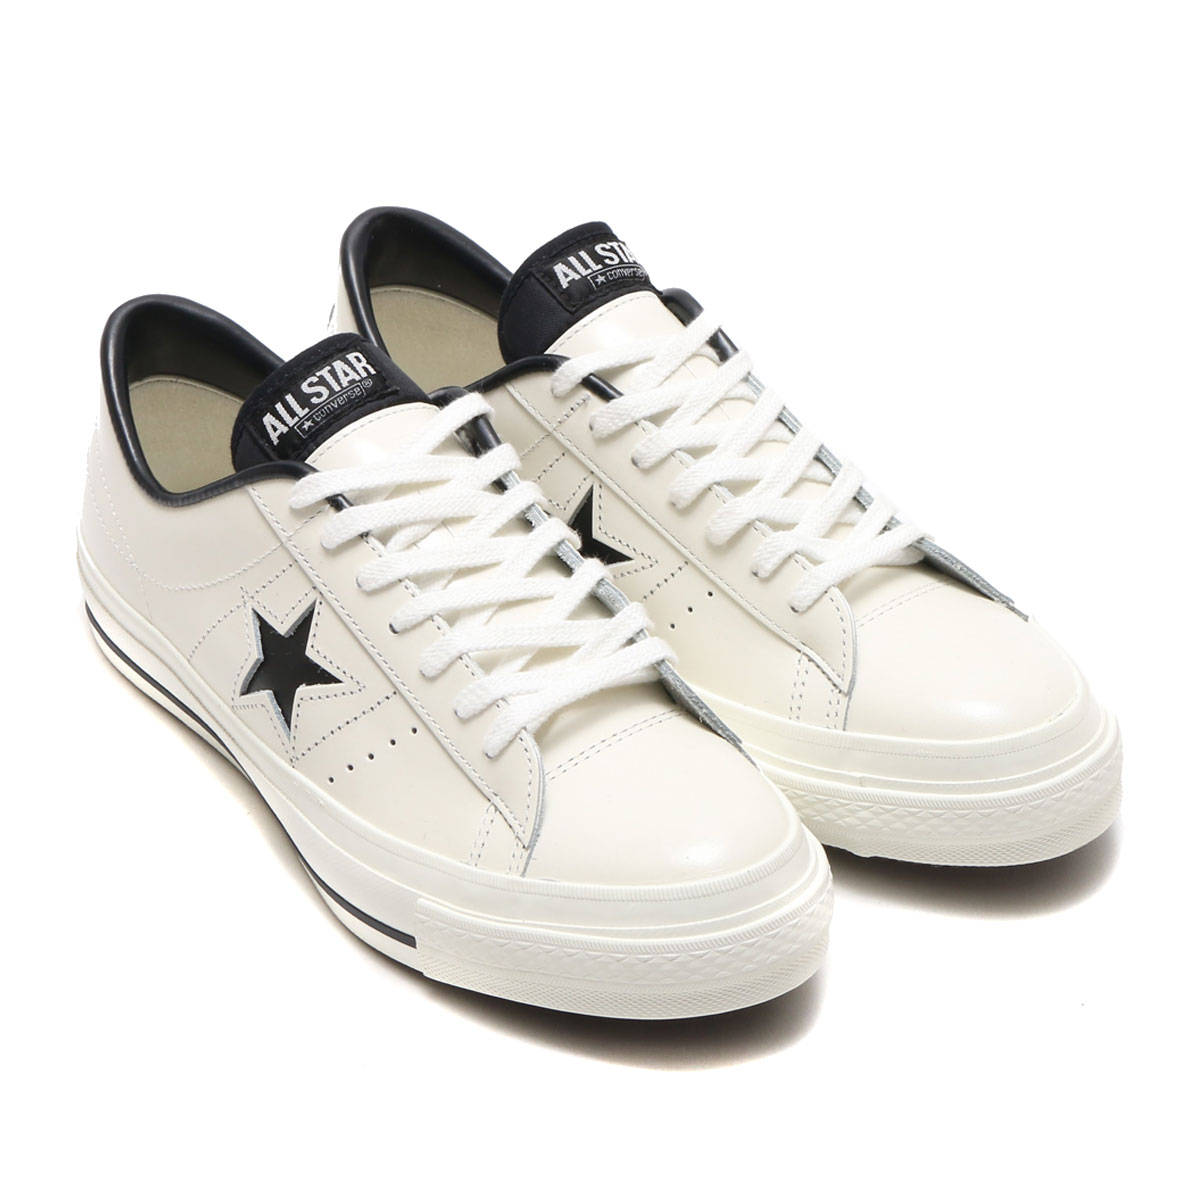 converse one star leather shoes